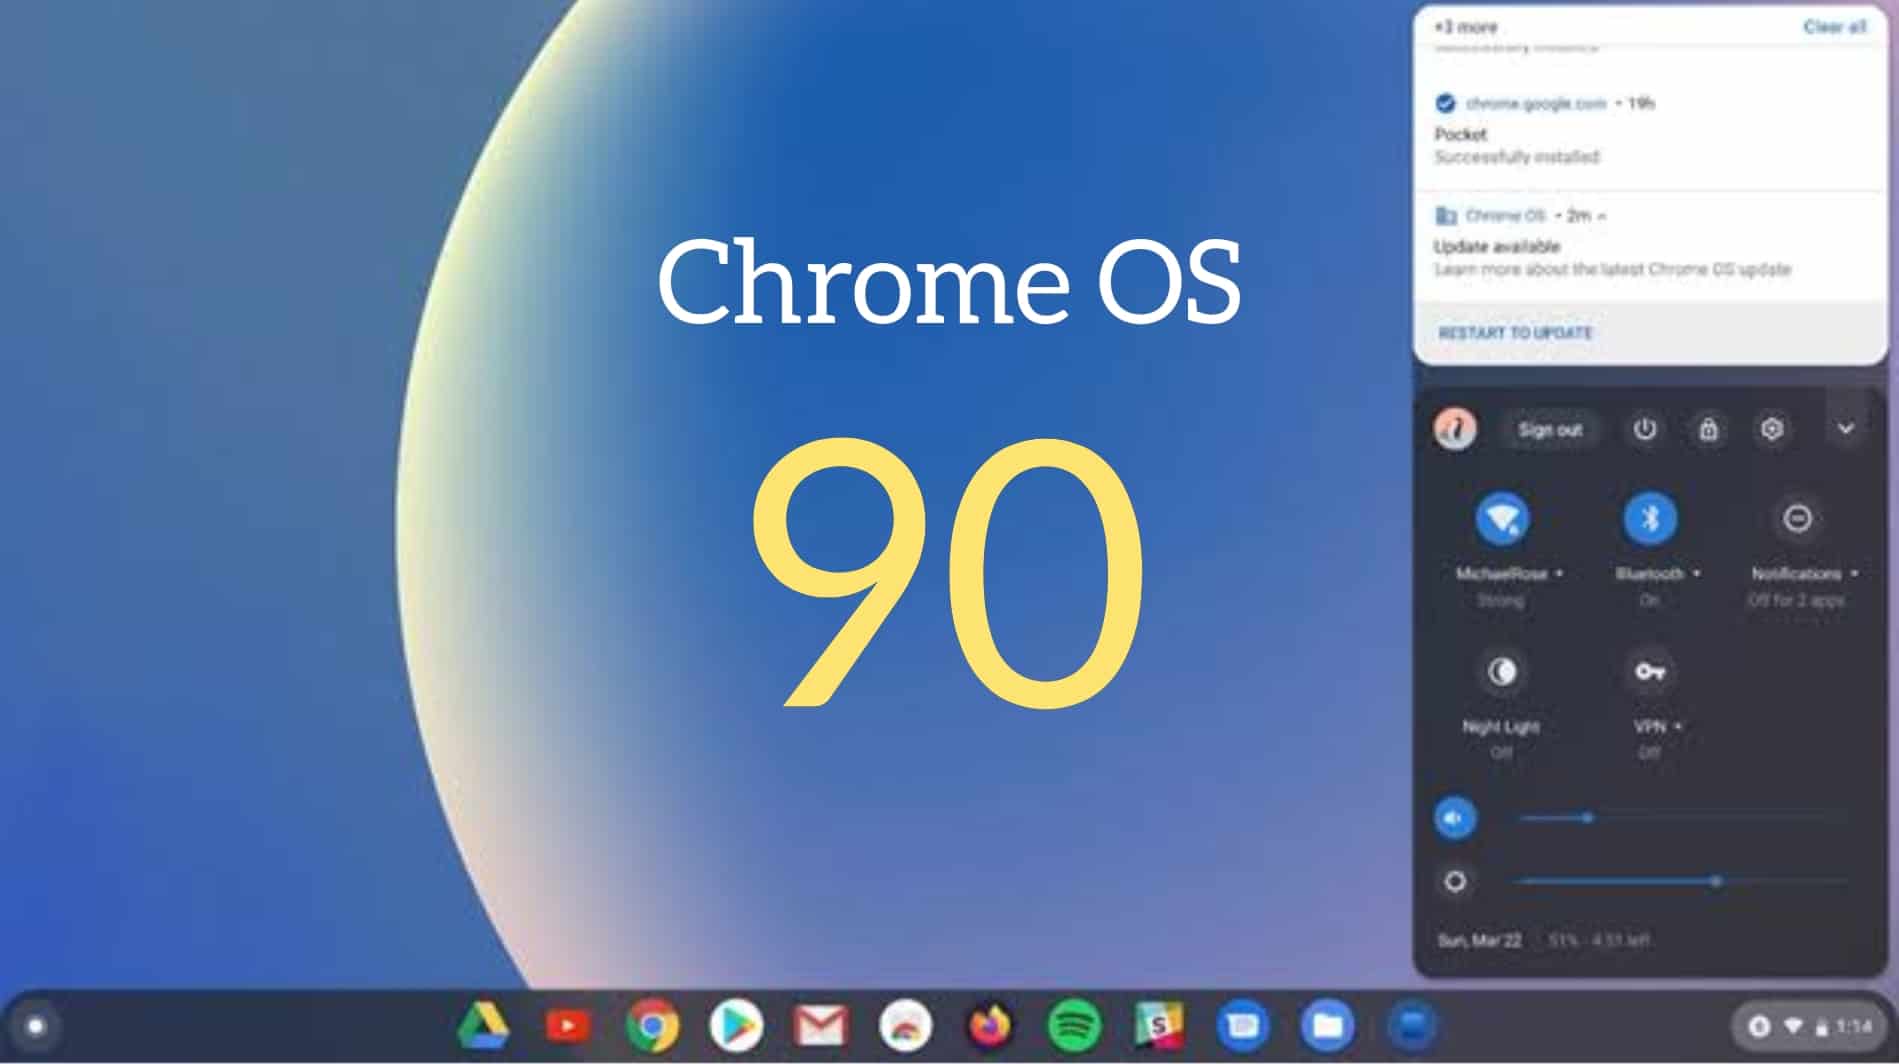 how to download microsoft teams to chromebook